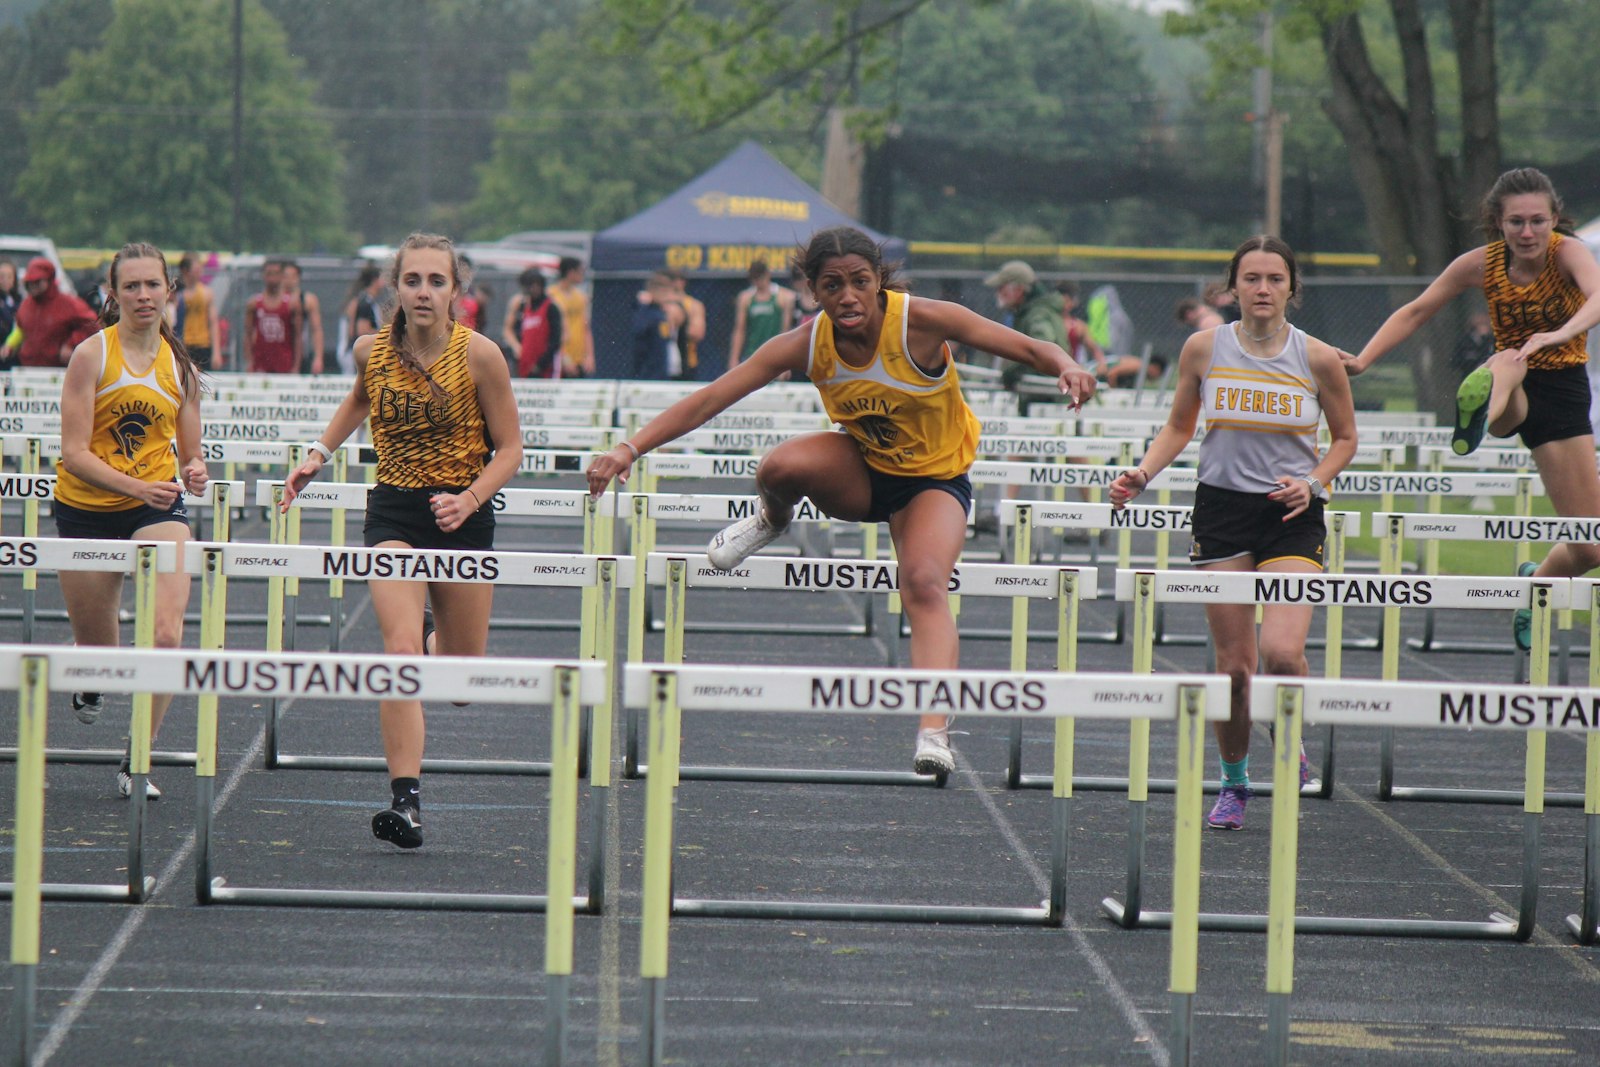 Royal Oak Shrine’s Charlotte Terbrack approaches the final jump in the 100-meter hurdles. She won both the high hurdle and low hurdle races during the Catholic League Cardinal Division track and field championship meet on May 25.